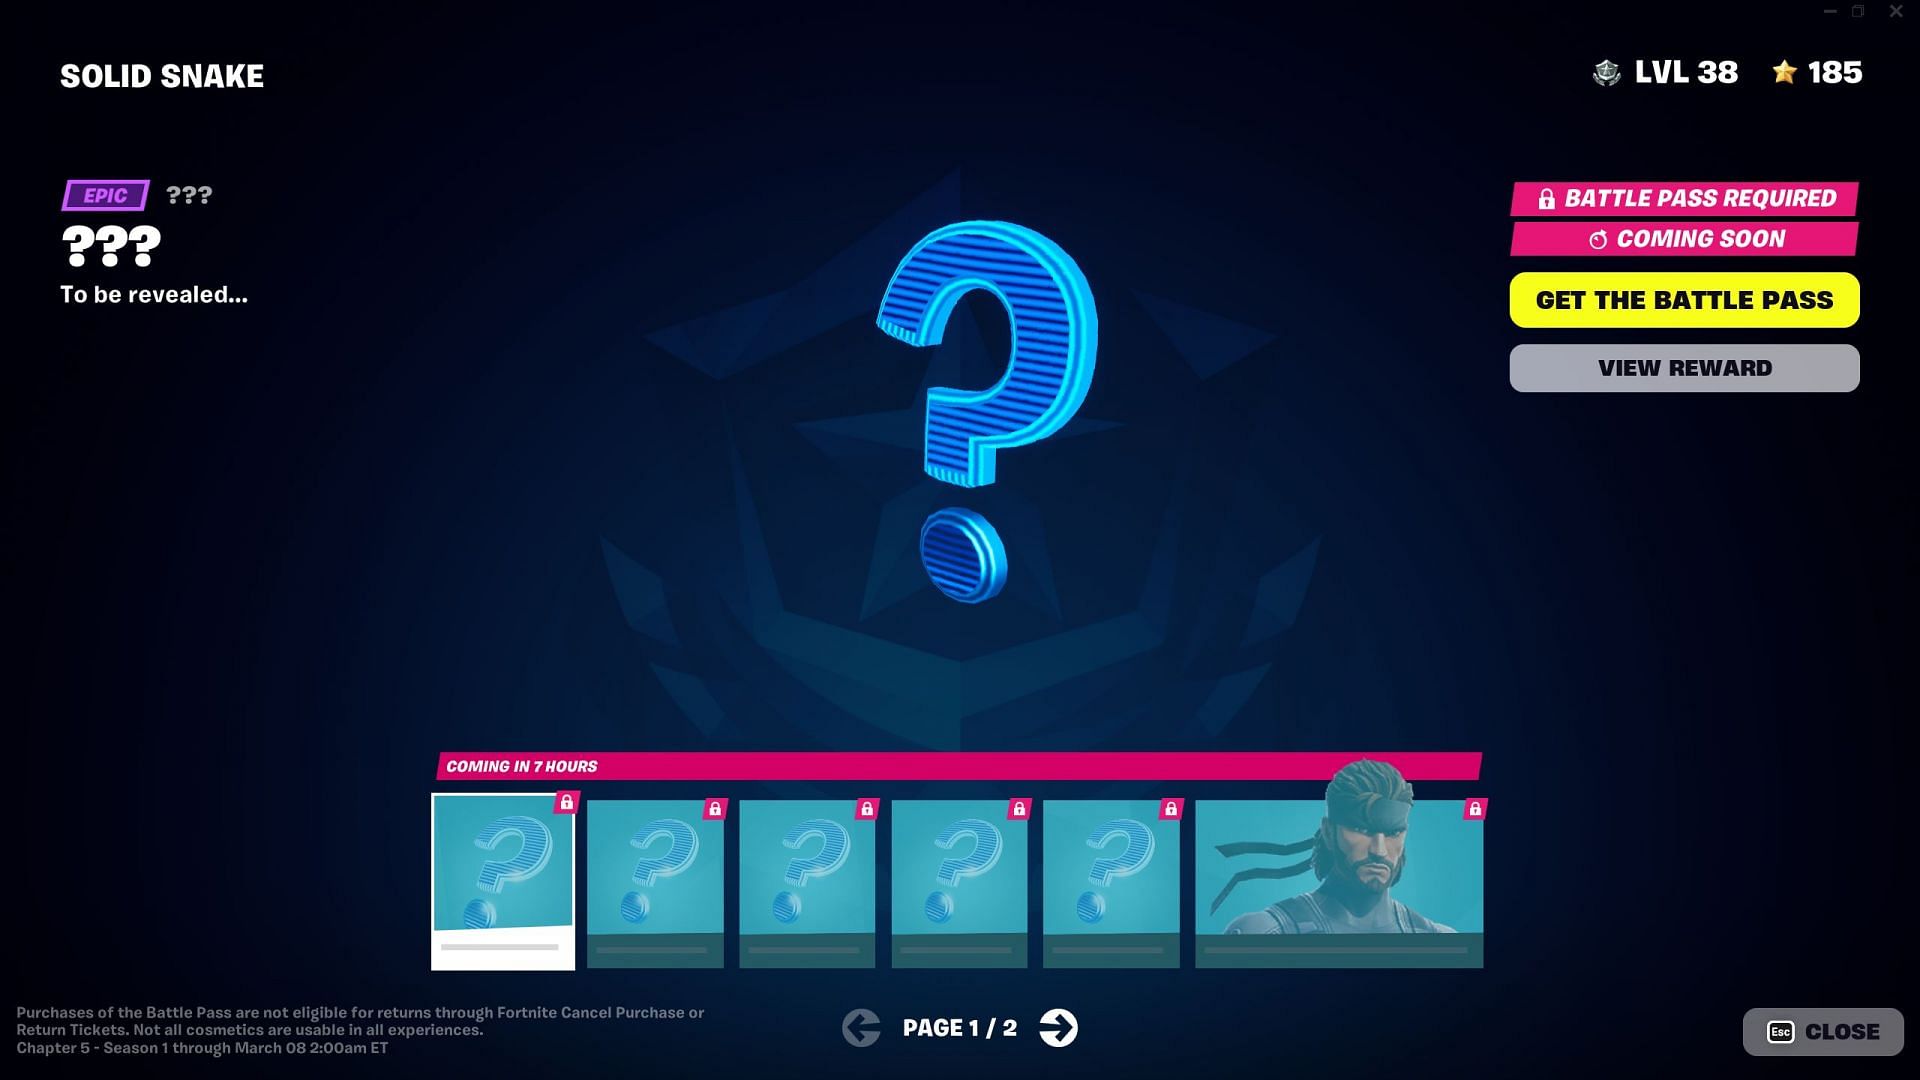 Solid Snake Outfit will unlock soon (Image via Epic Games/Fortnite)